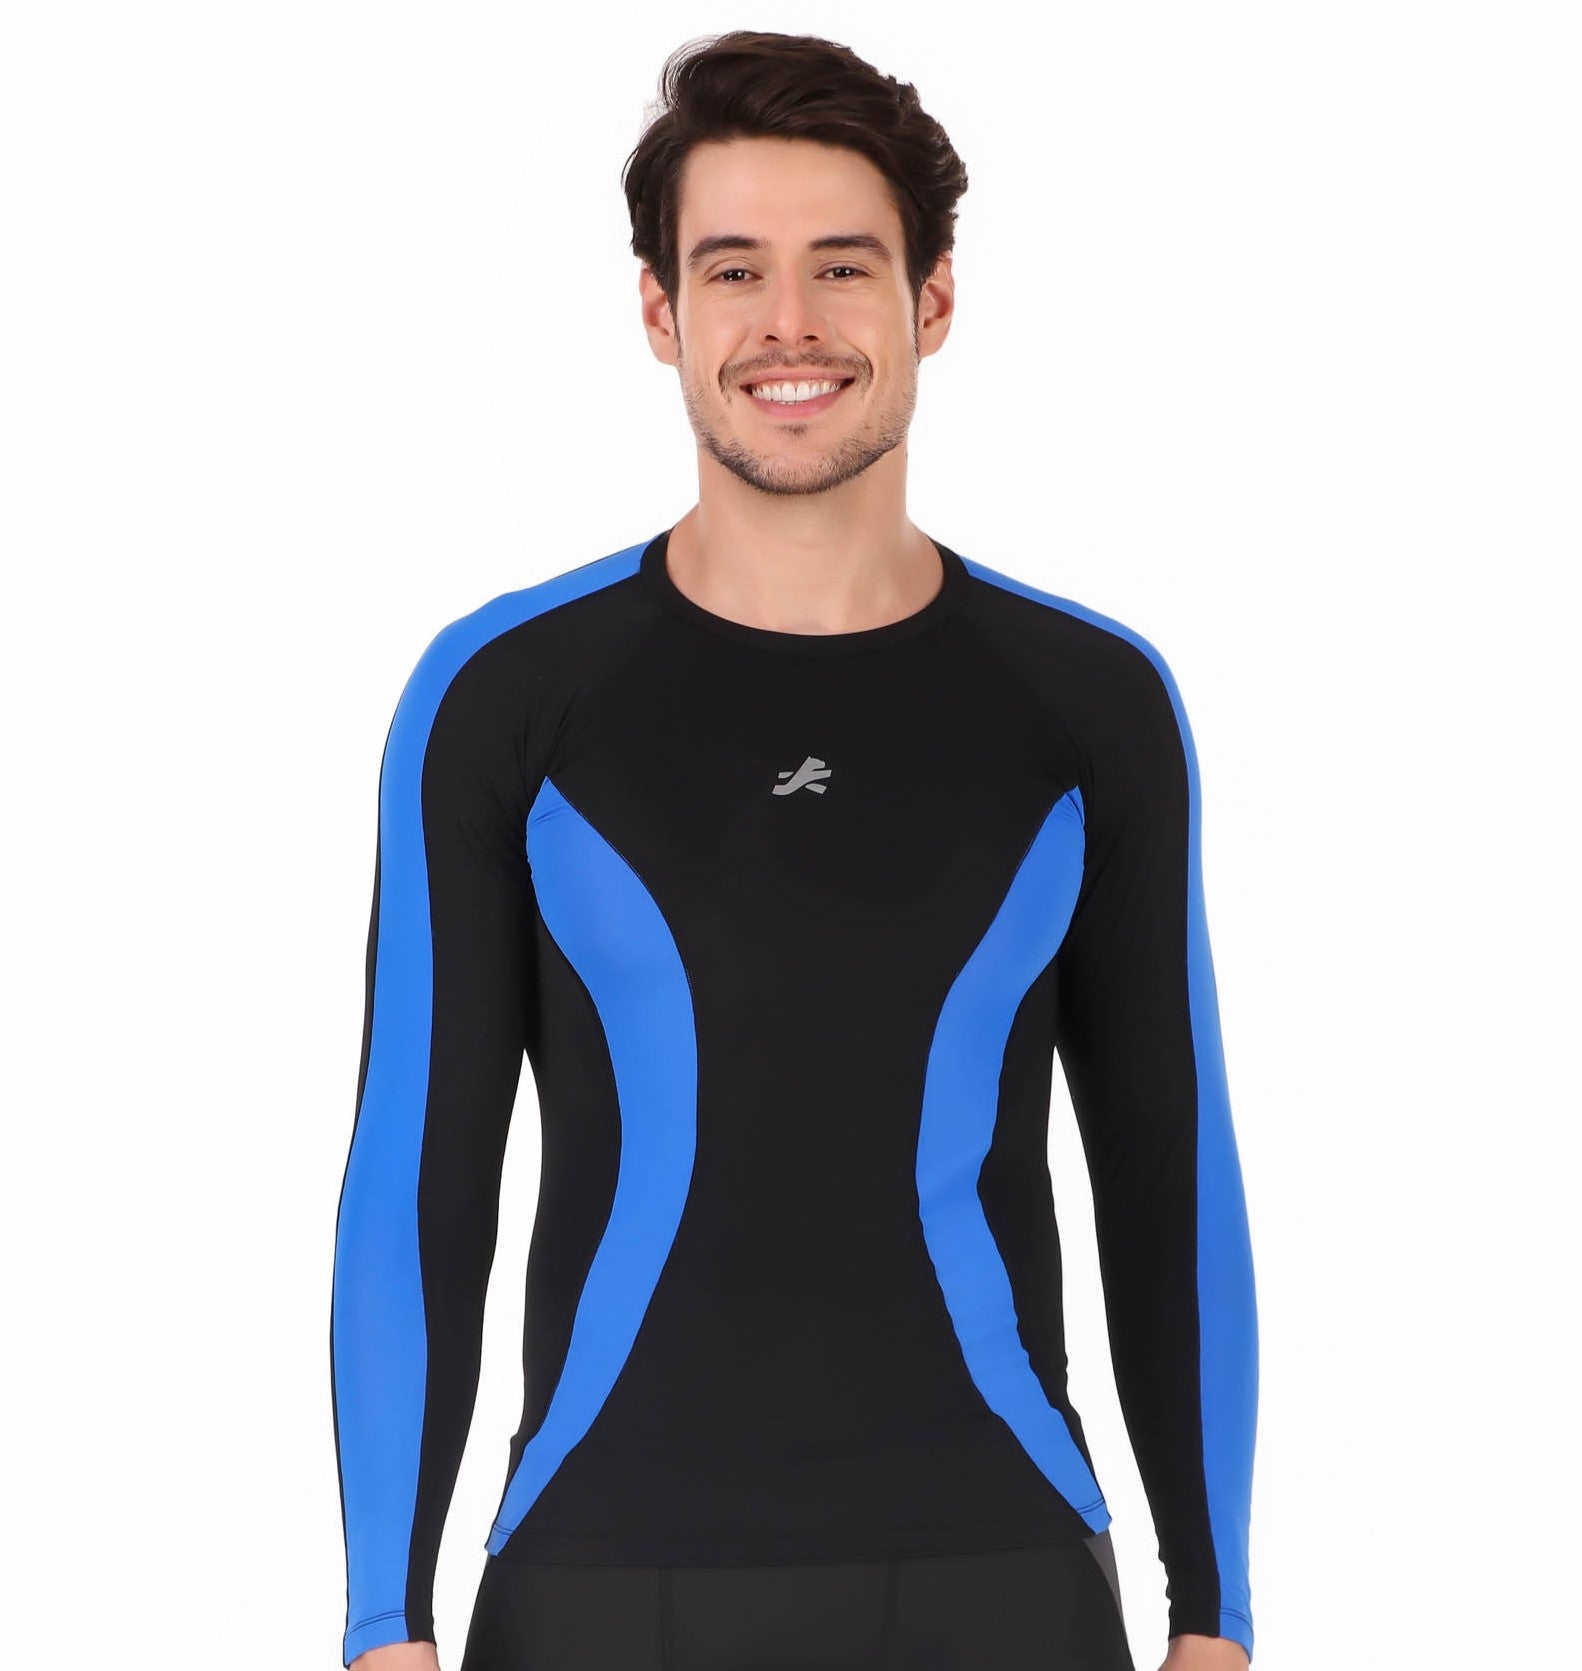 ReDesign Nylon Compression Top Full Sleeve (BLACK/ROYAL BLUE)